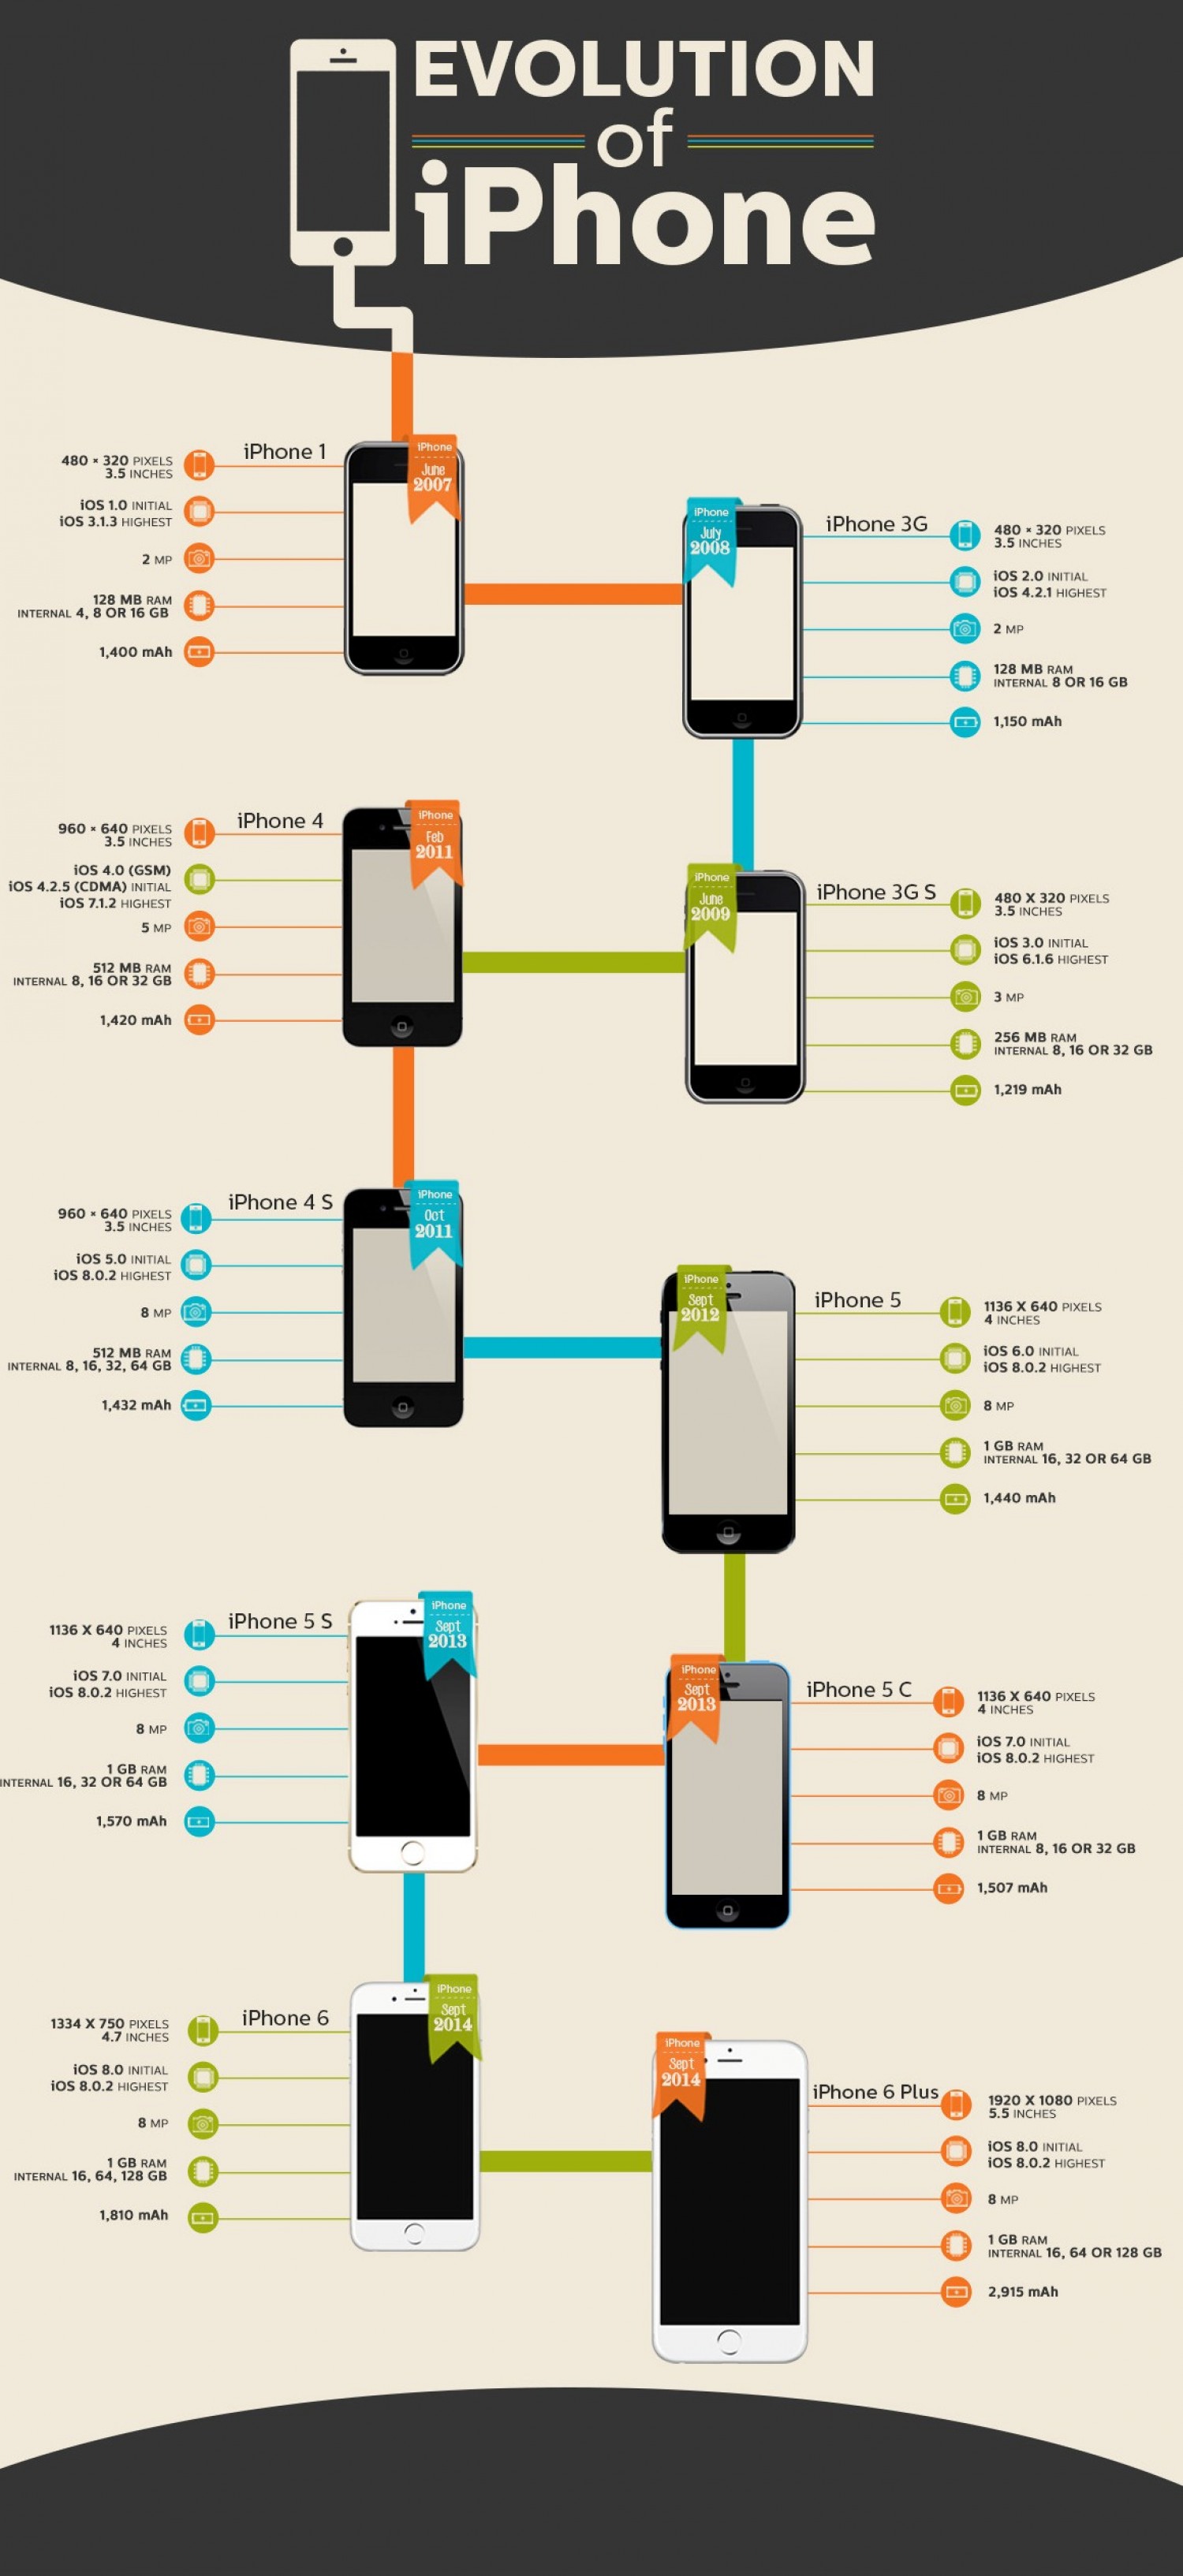 evolution-of-iphone-specs-with-release-dates_54c8d74ab89d0_w1500.jpg